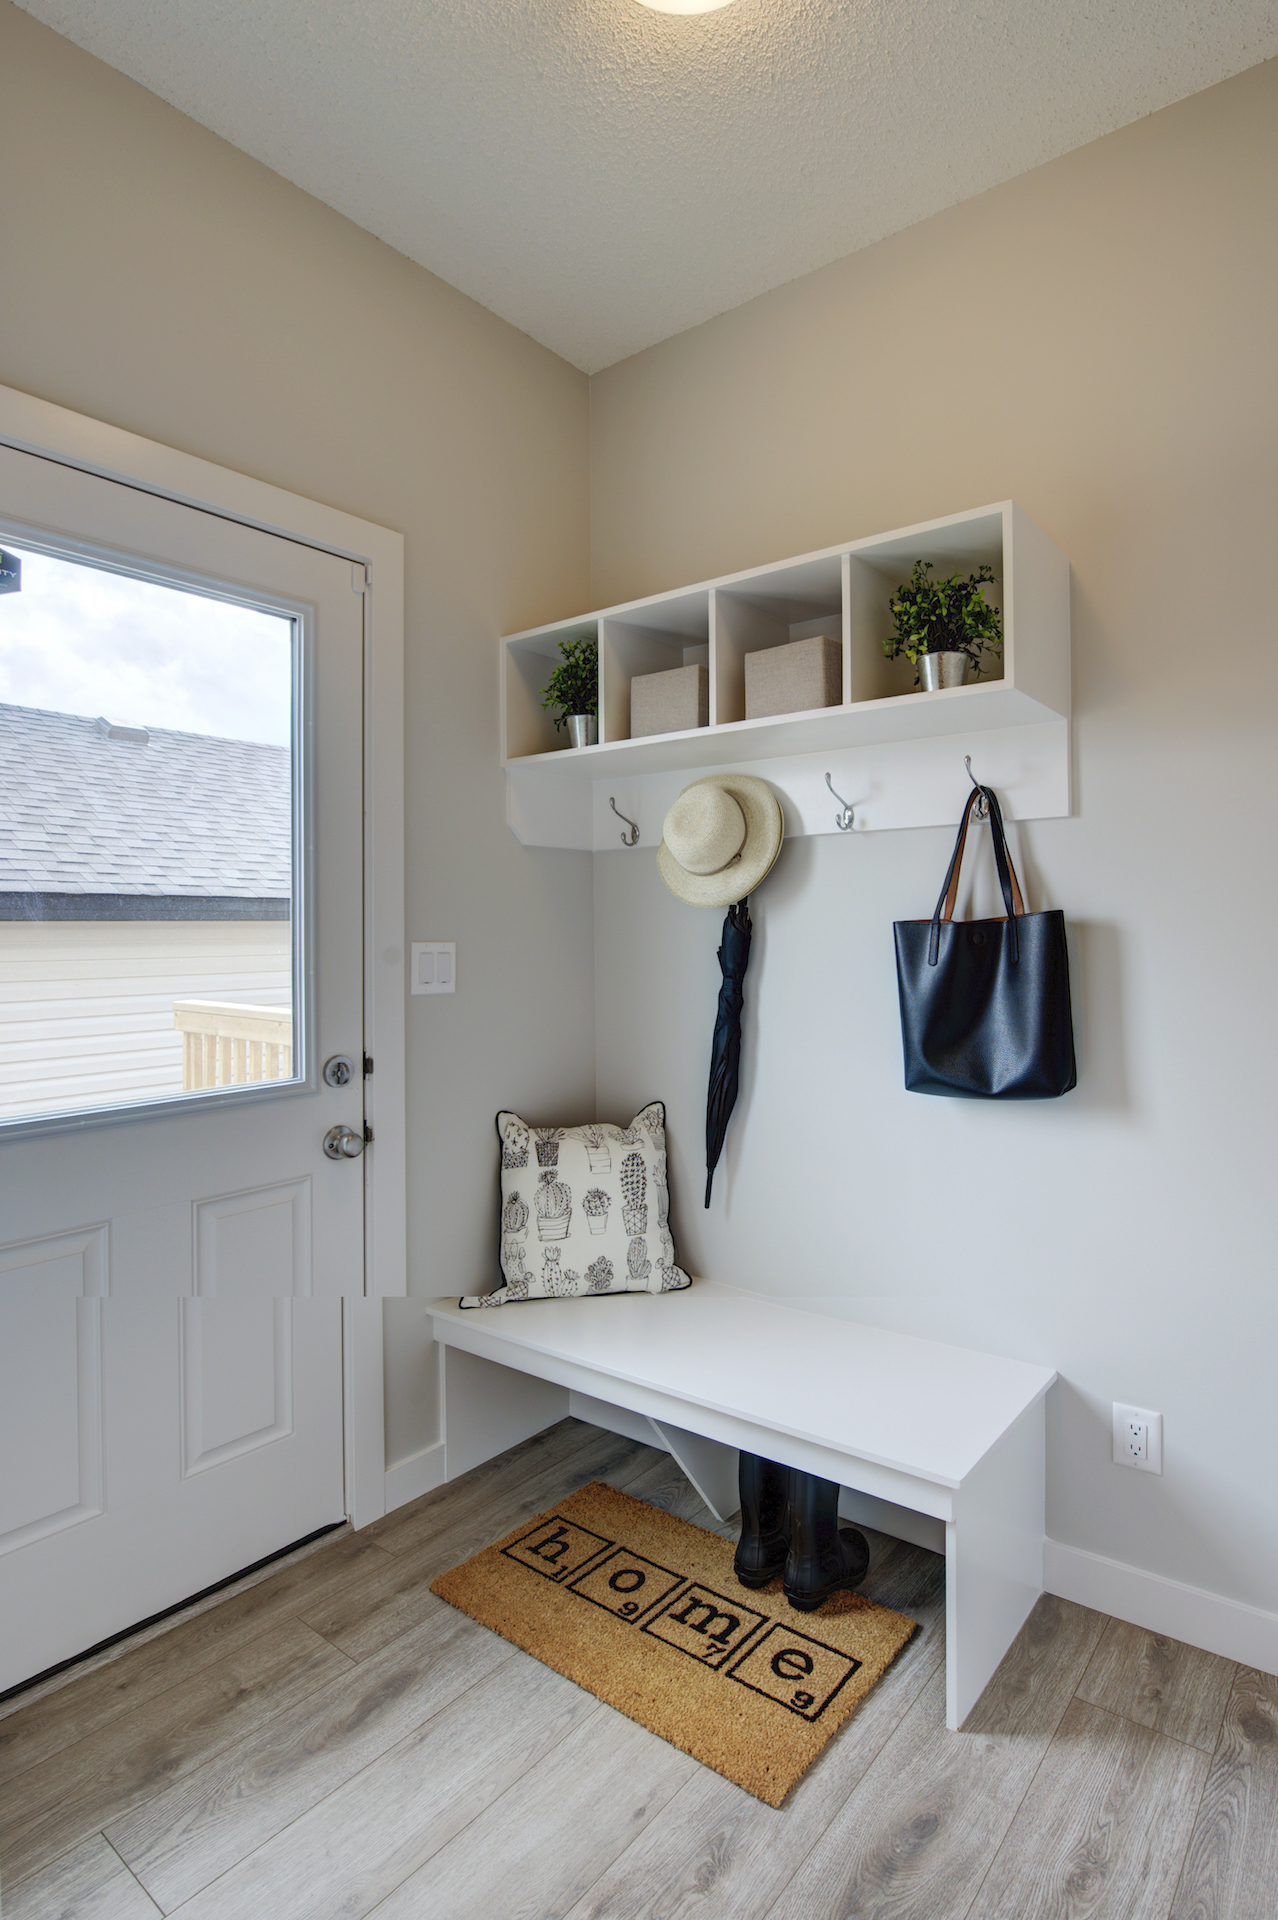 The entryway of a home with a white bench and coat hooks.